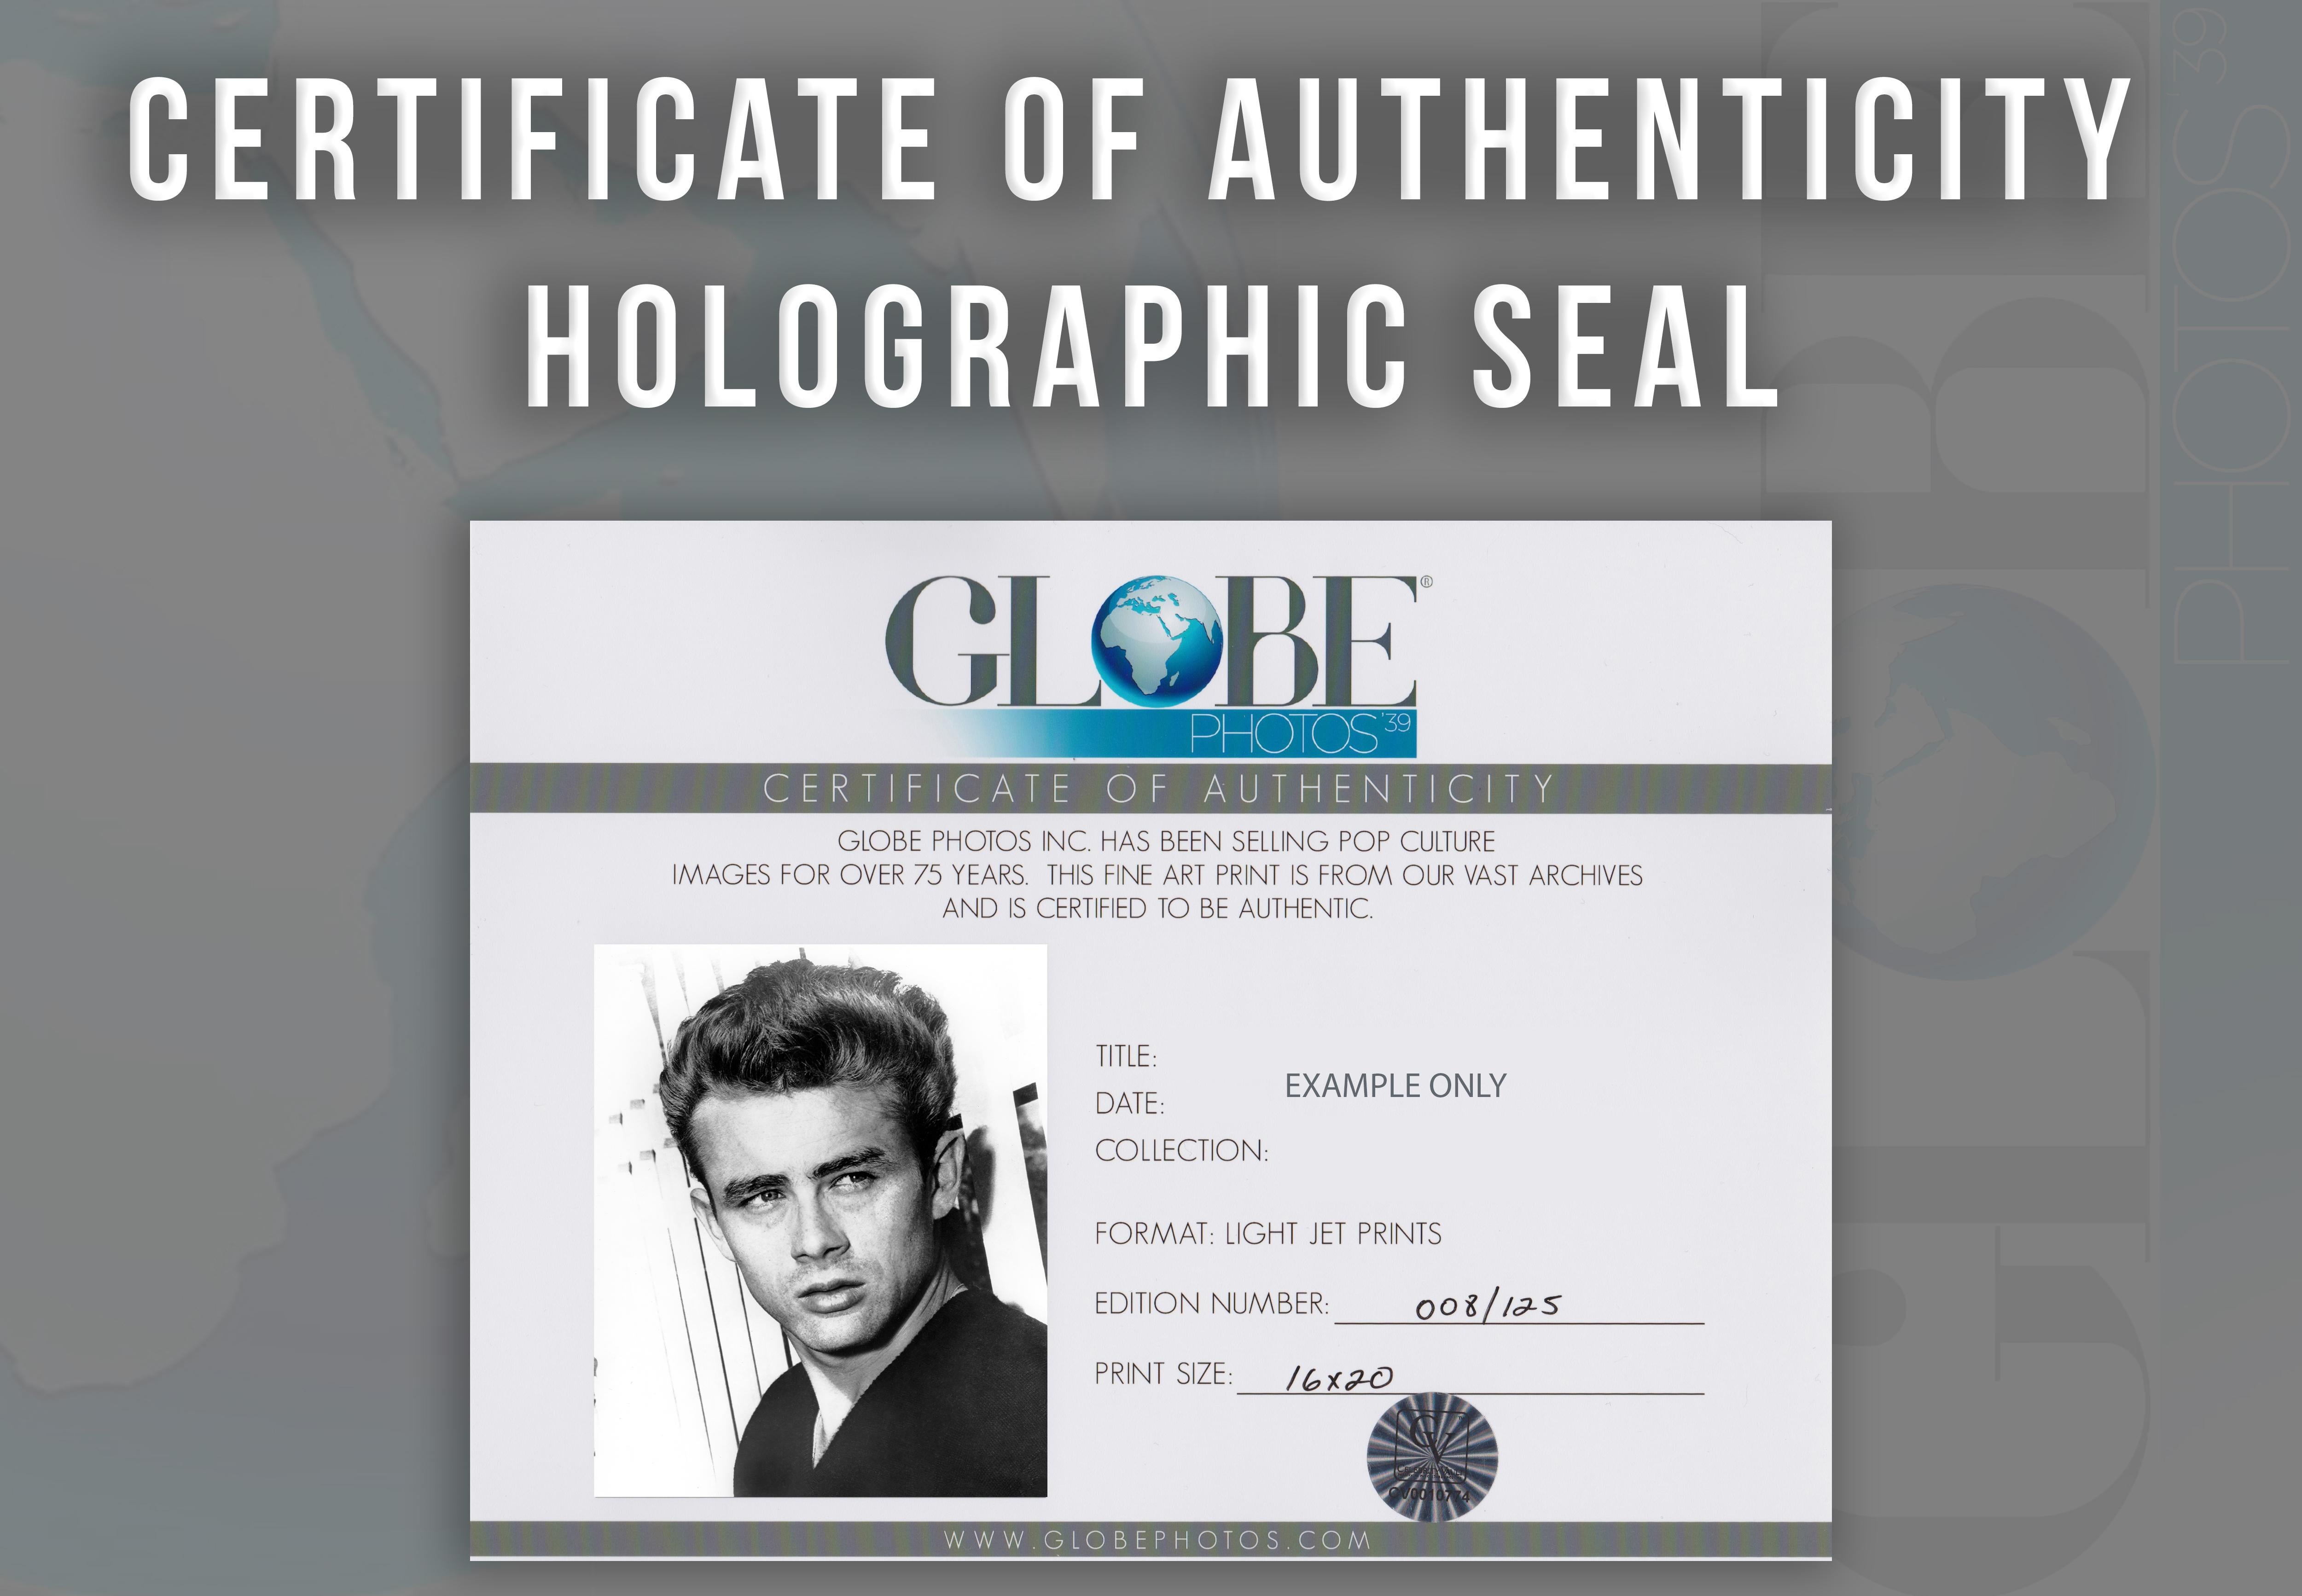 This black and white image features actor James Dean in a stunning closeup.

James Dean was an American actor from Indiana. He is remembered as a cultural icon of teenage disillusionment and social estrangement, as expressed in the title of his most